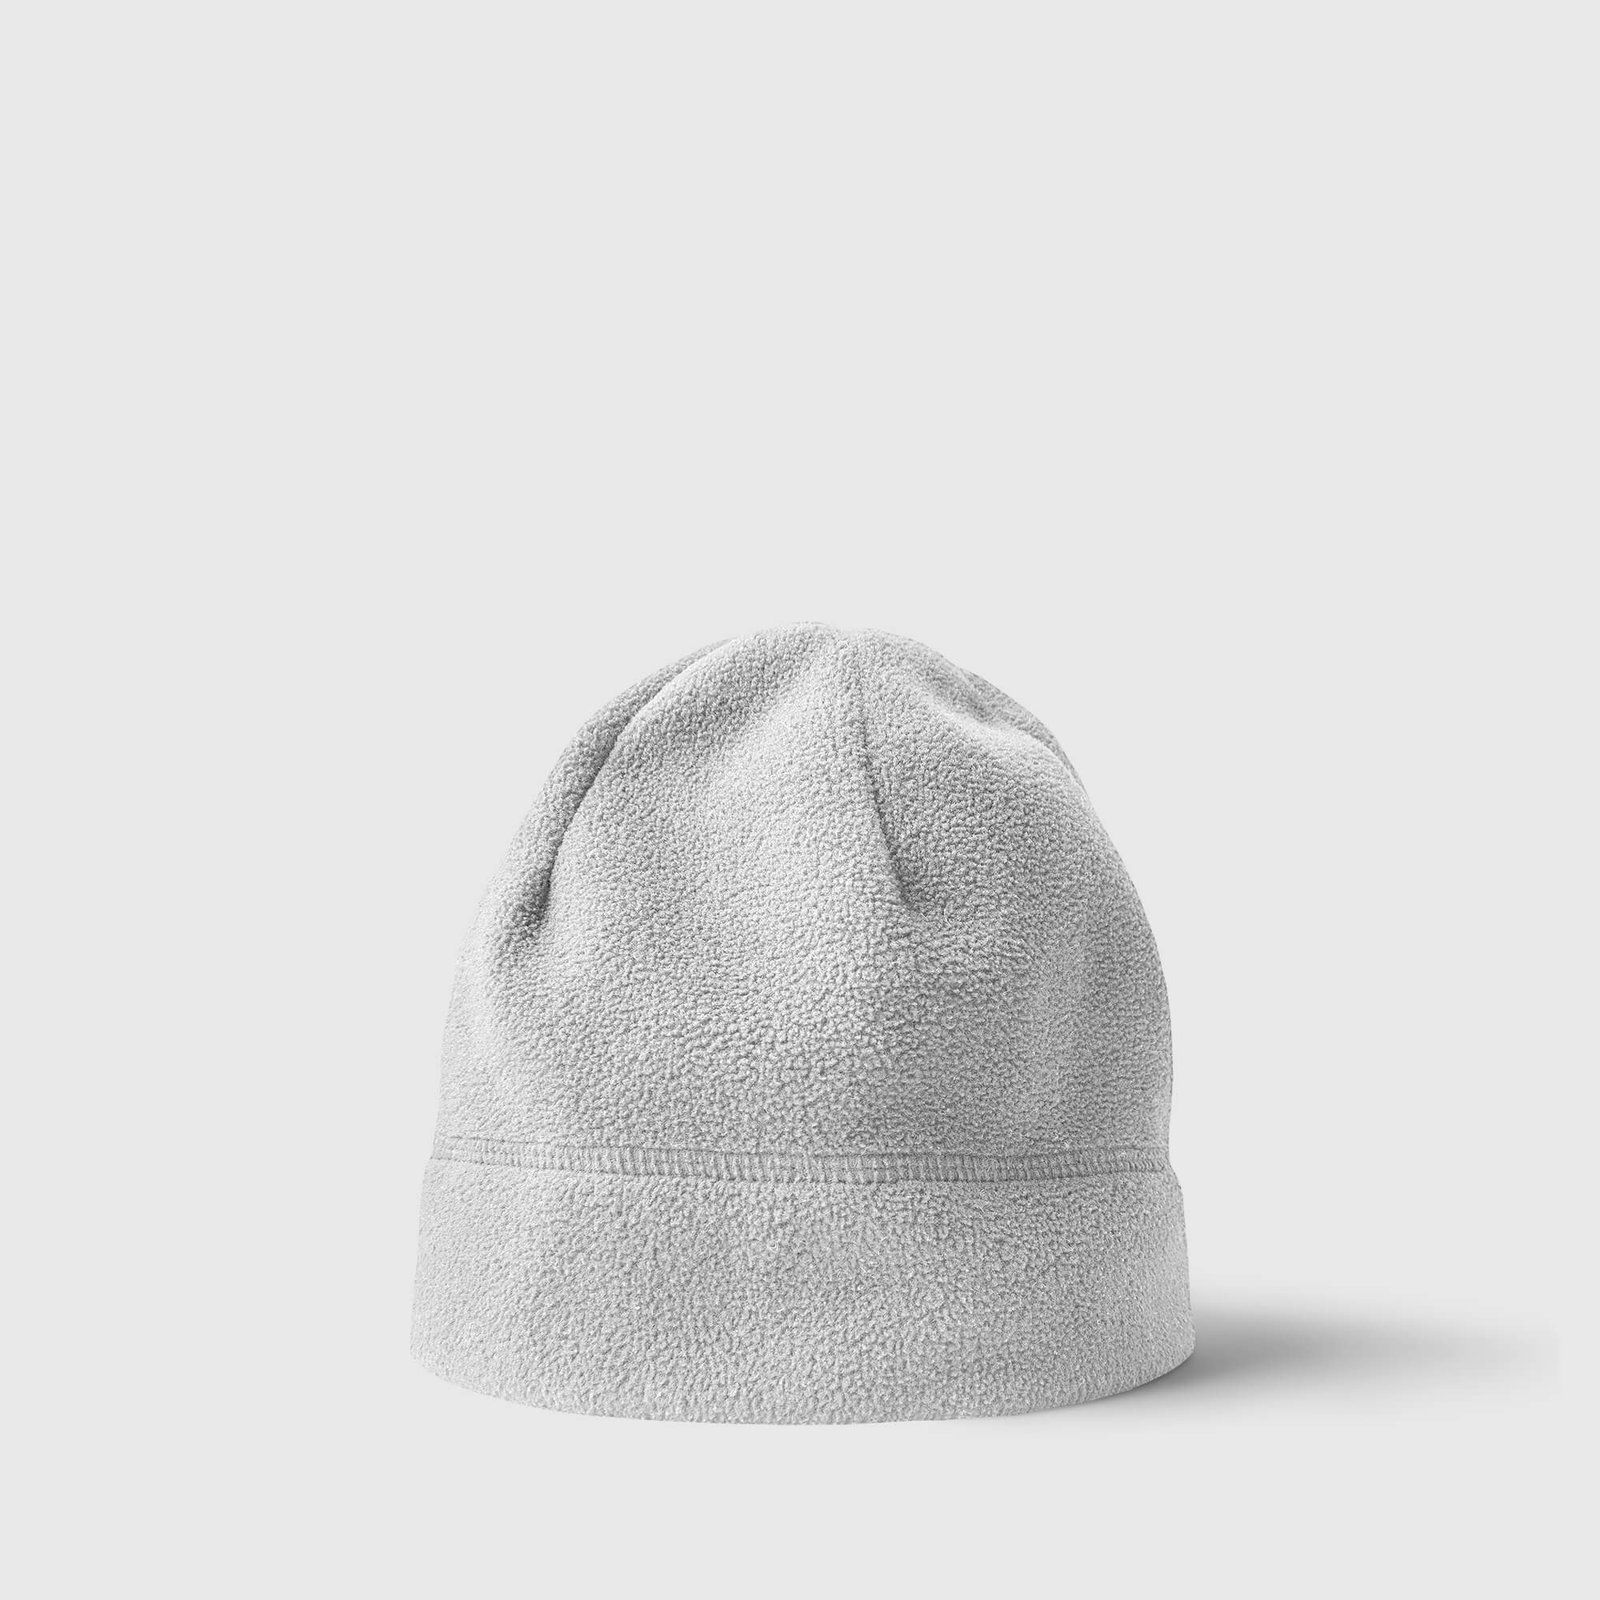 Blank Free Embroidered Beanie Mockup PSD Template